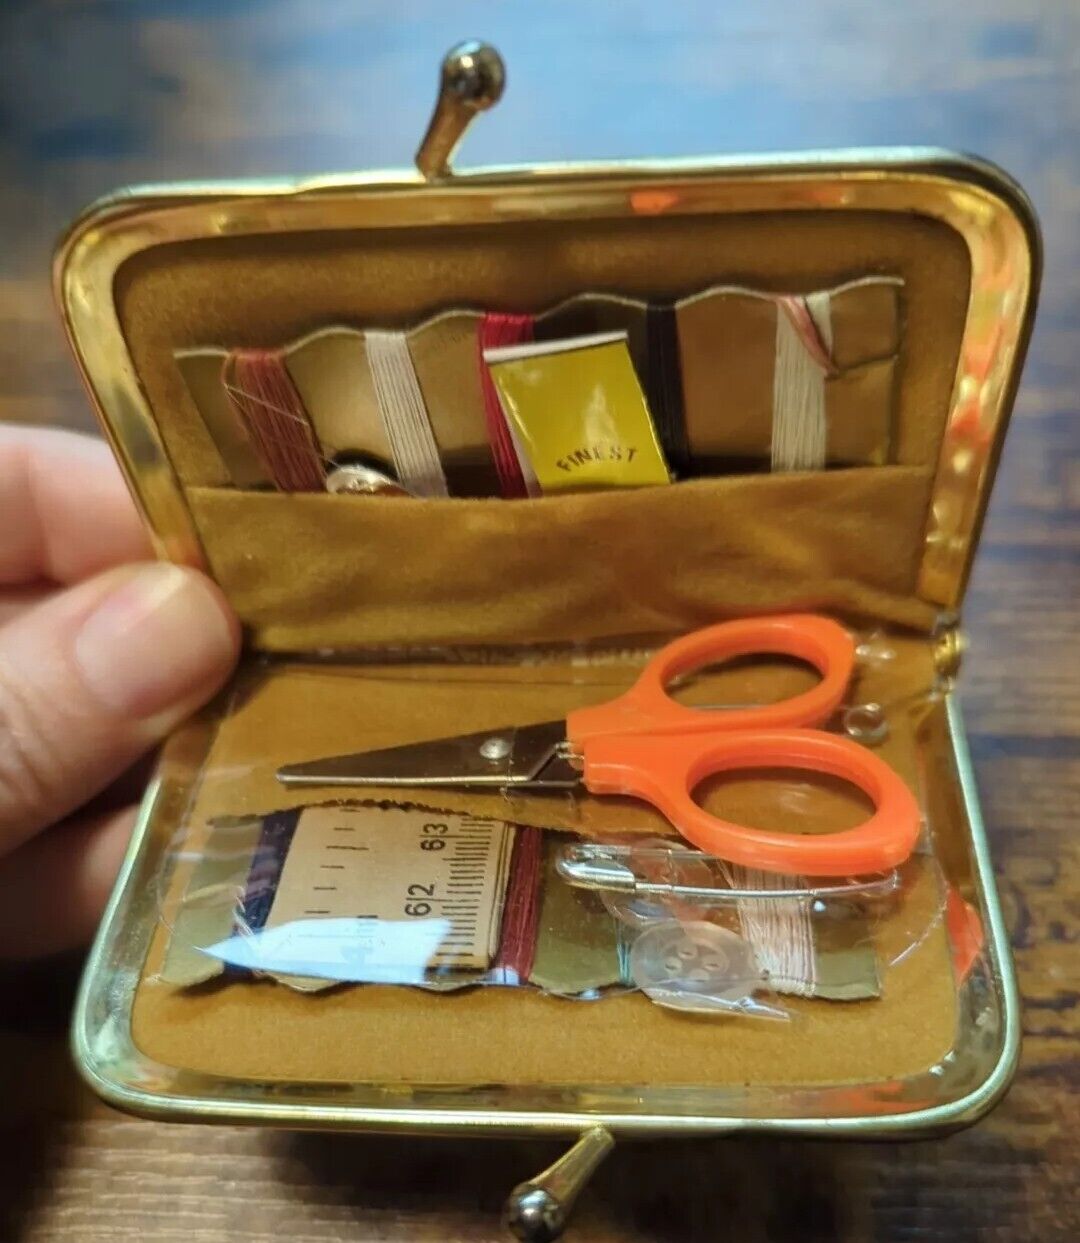 VTG J. Snyder Gold Clutch Kiss Clasp Travel Sewing Kit Cottage Granny Core